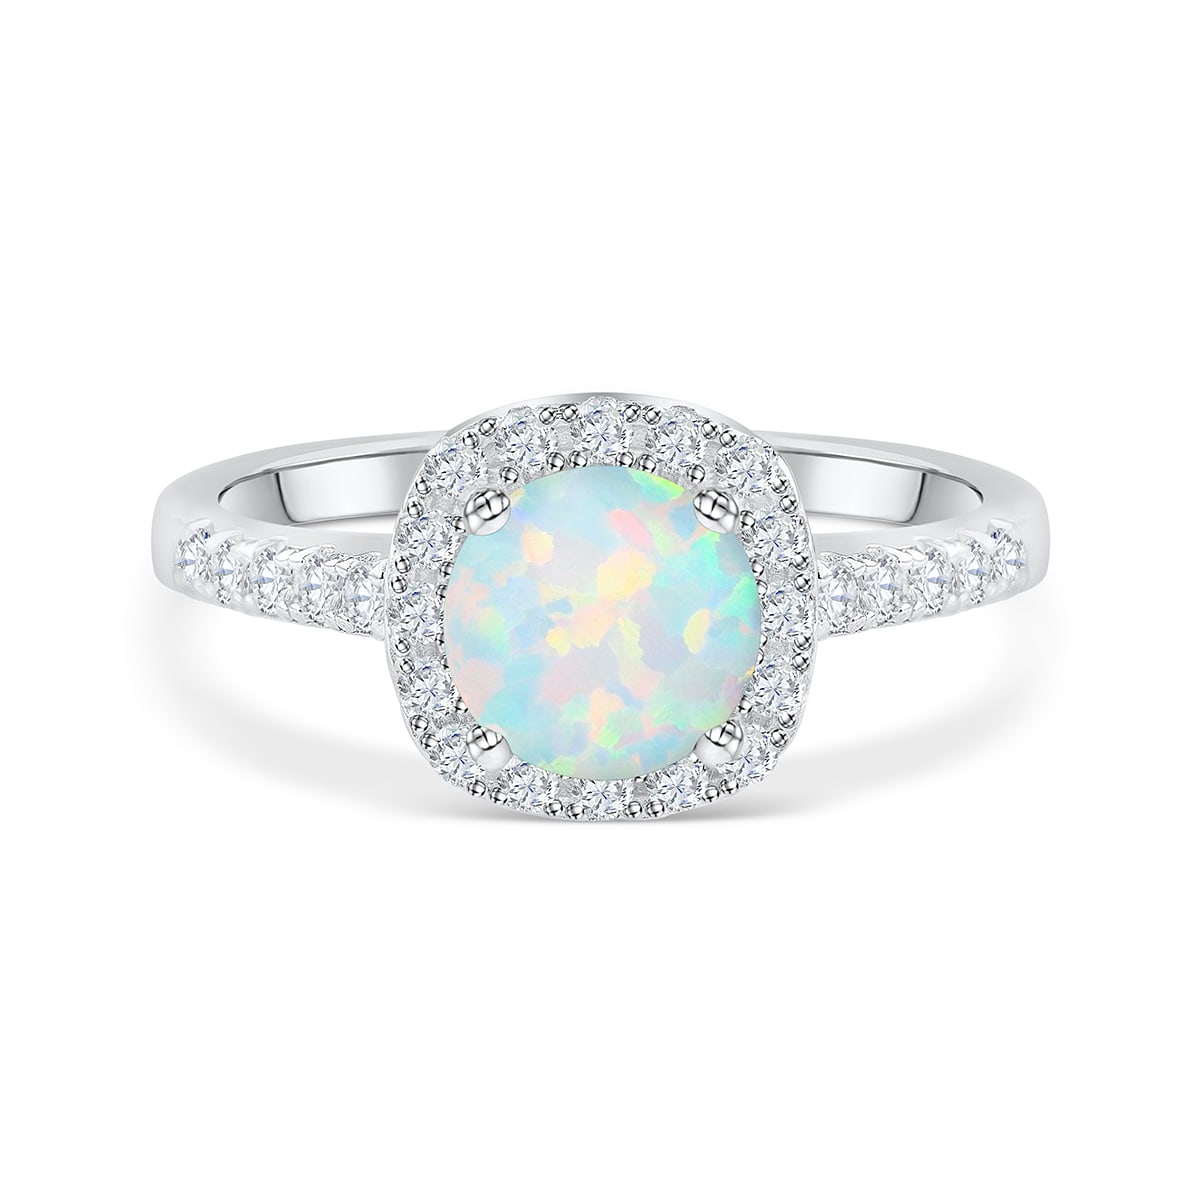 the halo wedding ring with opal stone